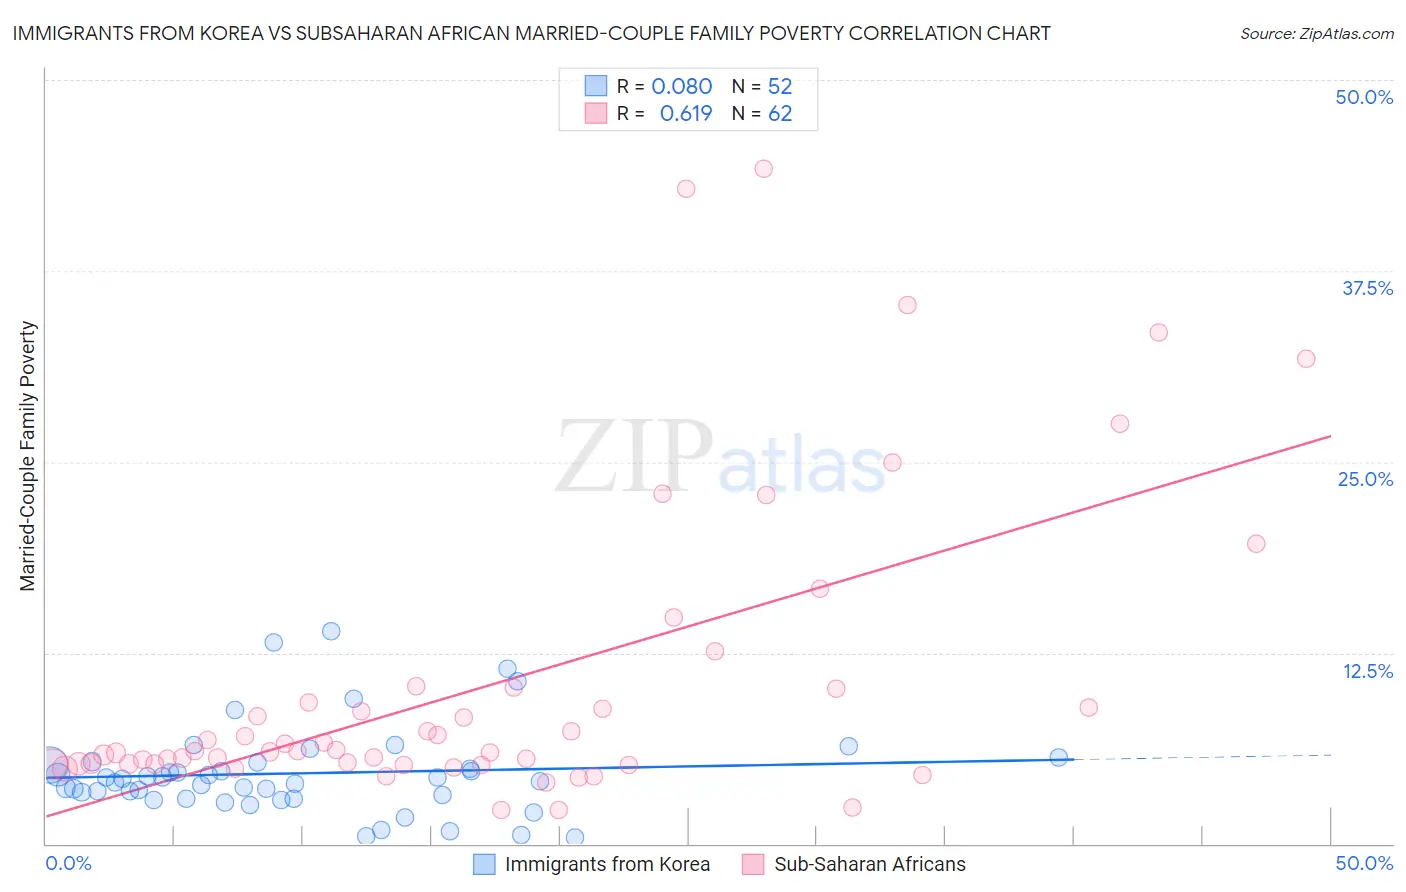 Immigrants from Korea vs Subsaharan African Married-Couple Family Poverty